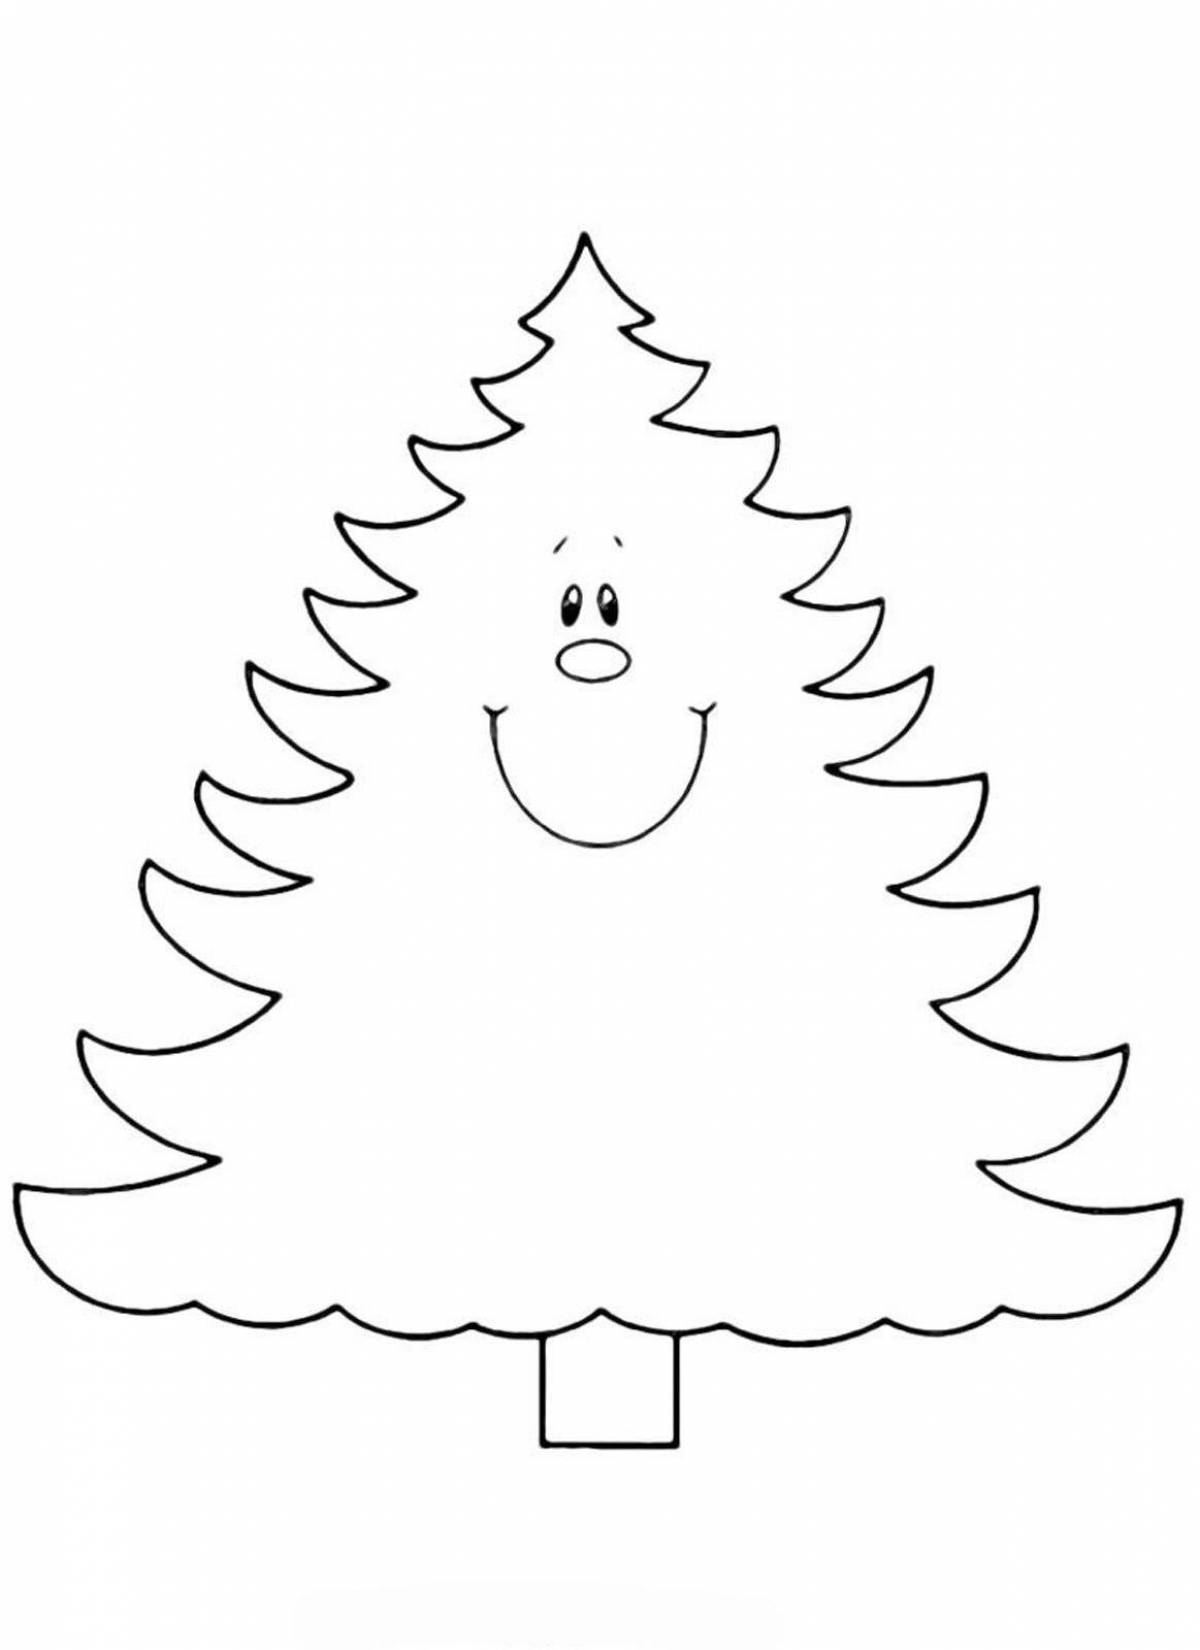 Christmas tree coloring book for preschoolers 2-3 years old